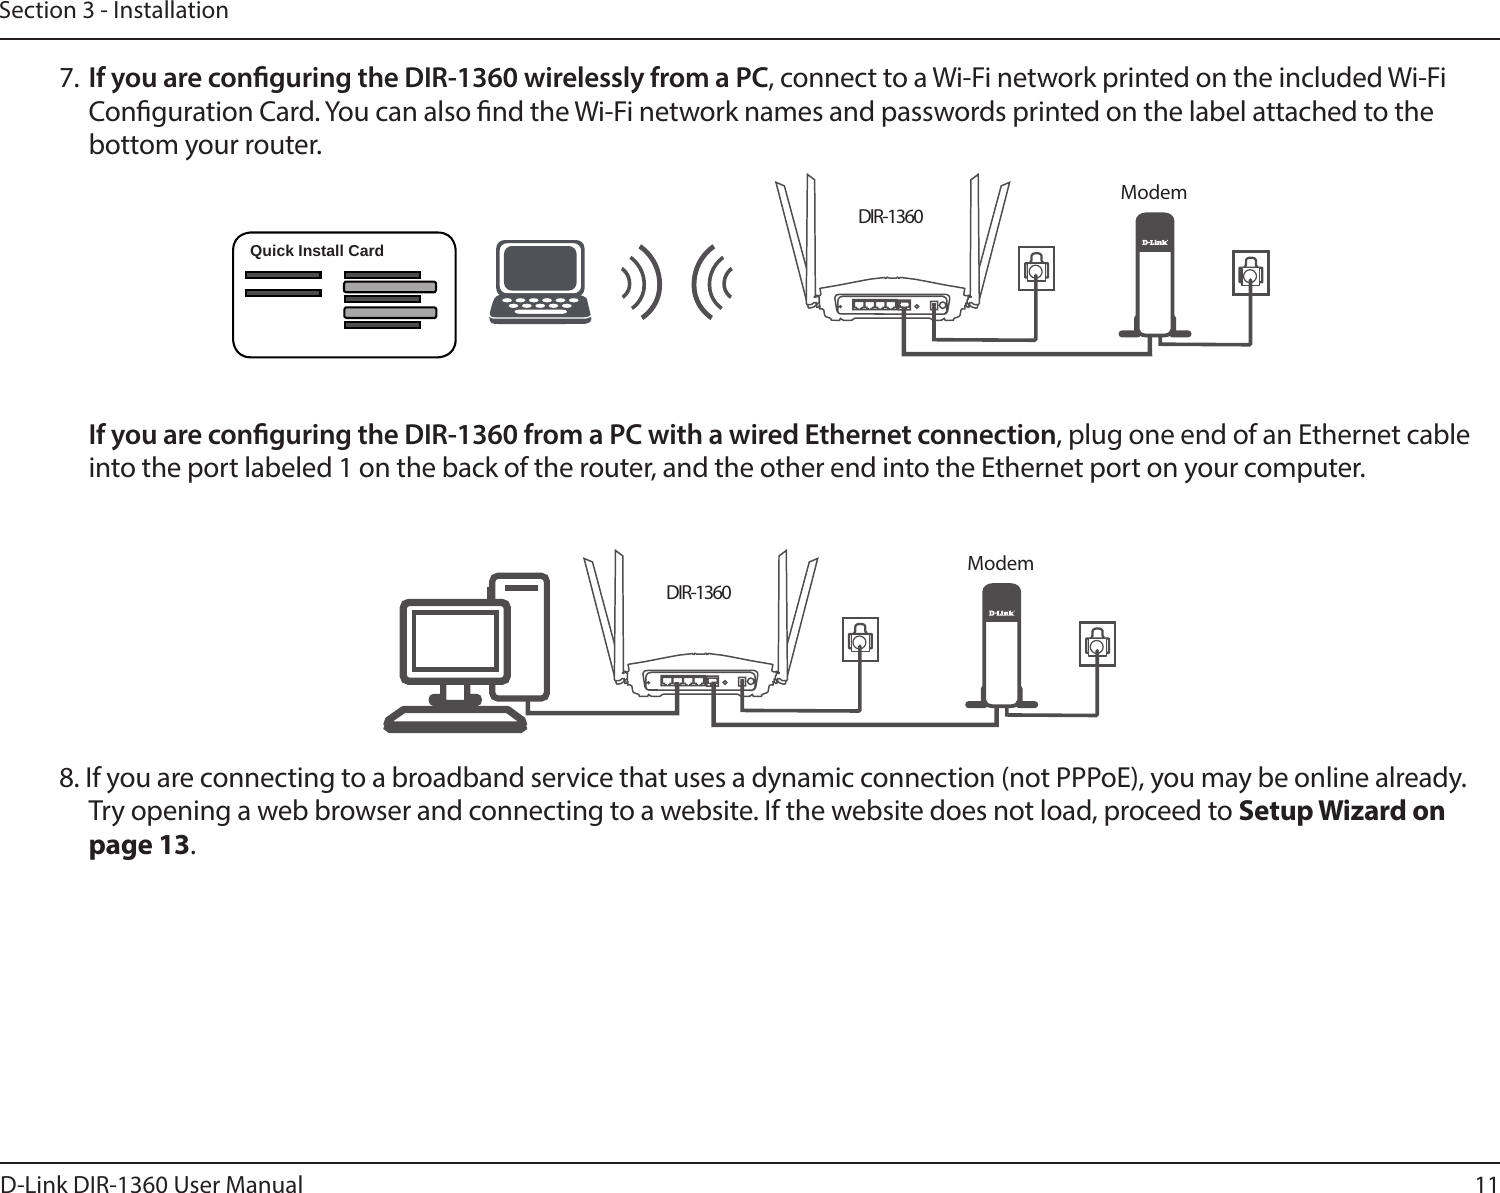 11D-Link DIR-1360 User ManualSection 3 - InstallationDIR-1360DIR-1360 If you are conguring the DIR-1360 from a PC with a wired Ethernet connection, plug one end of an Ethernet cable into the port labeled 1 on the back of the router, and the other end into the Ethernet port on your computer.Quick Install CardModem7. If you are conguring the DIR-1360 wirelessly from a PC, connect to a Wi-Fi network printed on the included Wi-Fi Conguration Card. You can also nd the Wi-Fi network names and passwords printed on the label attached to the bottom your router.Modem8. If you are connecting to a broadband service that uses a dynamic connection (not PPPoE), you may be online already. Try opening a web browser and connecting to a website. If the website does not load, proceed to Setup Wizard on page 13.